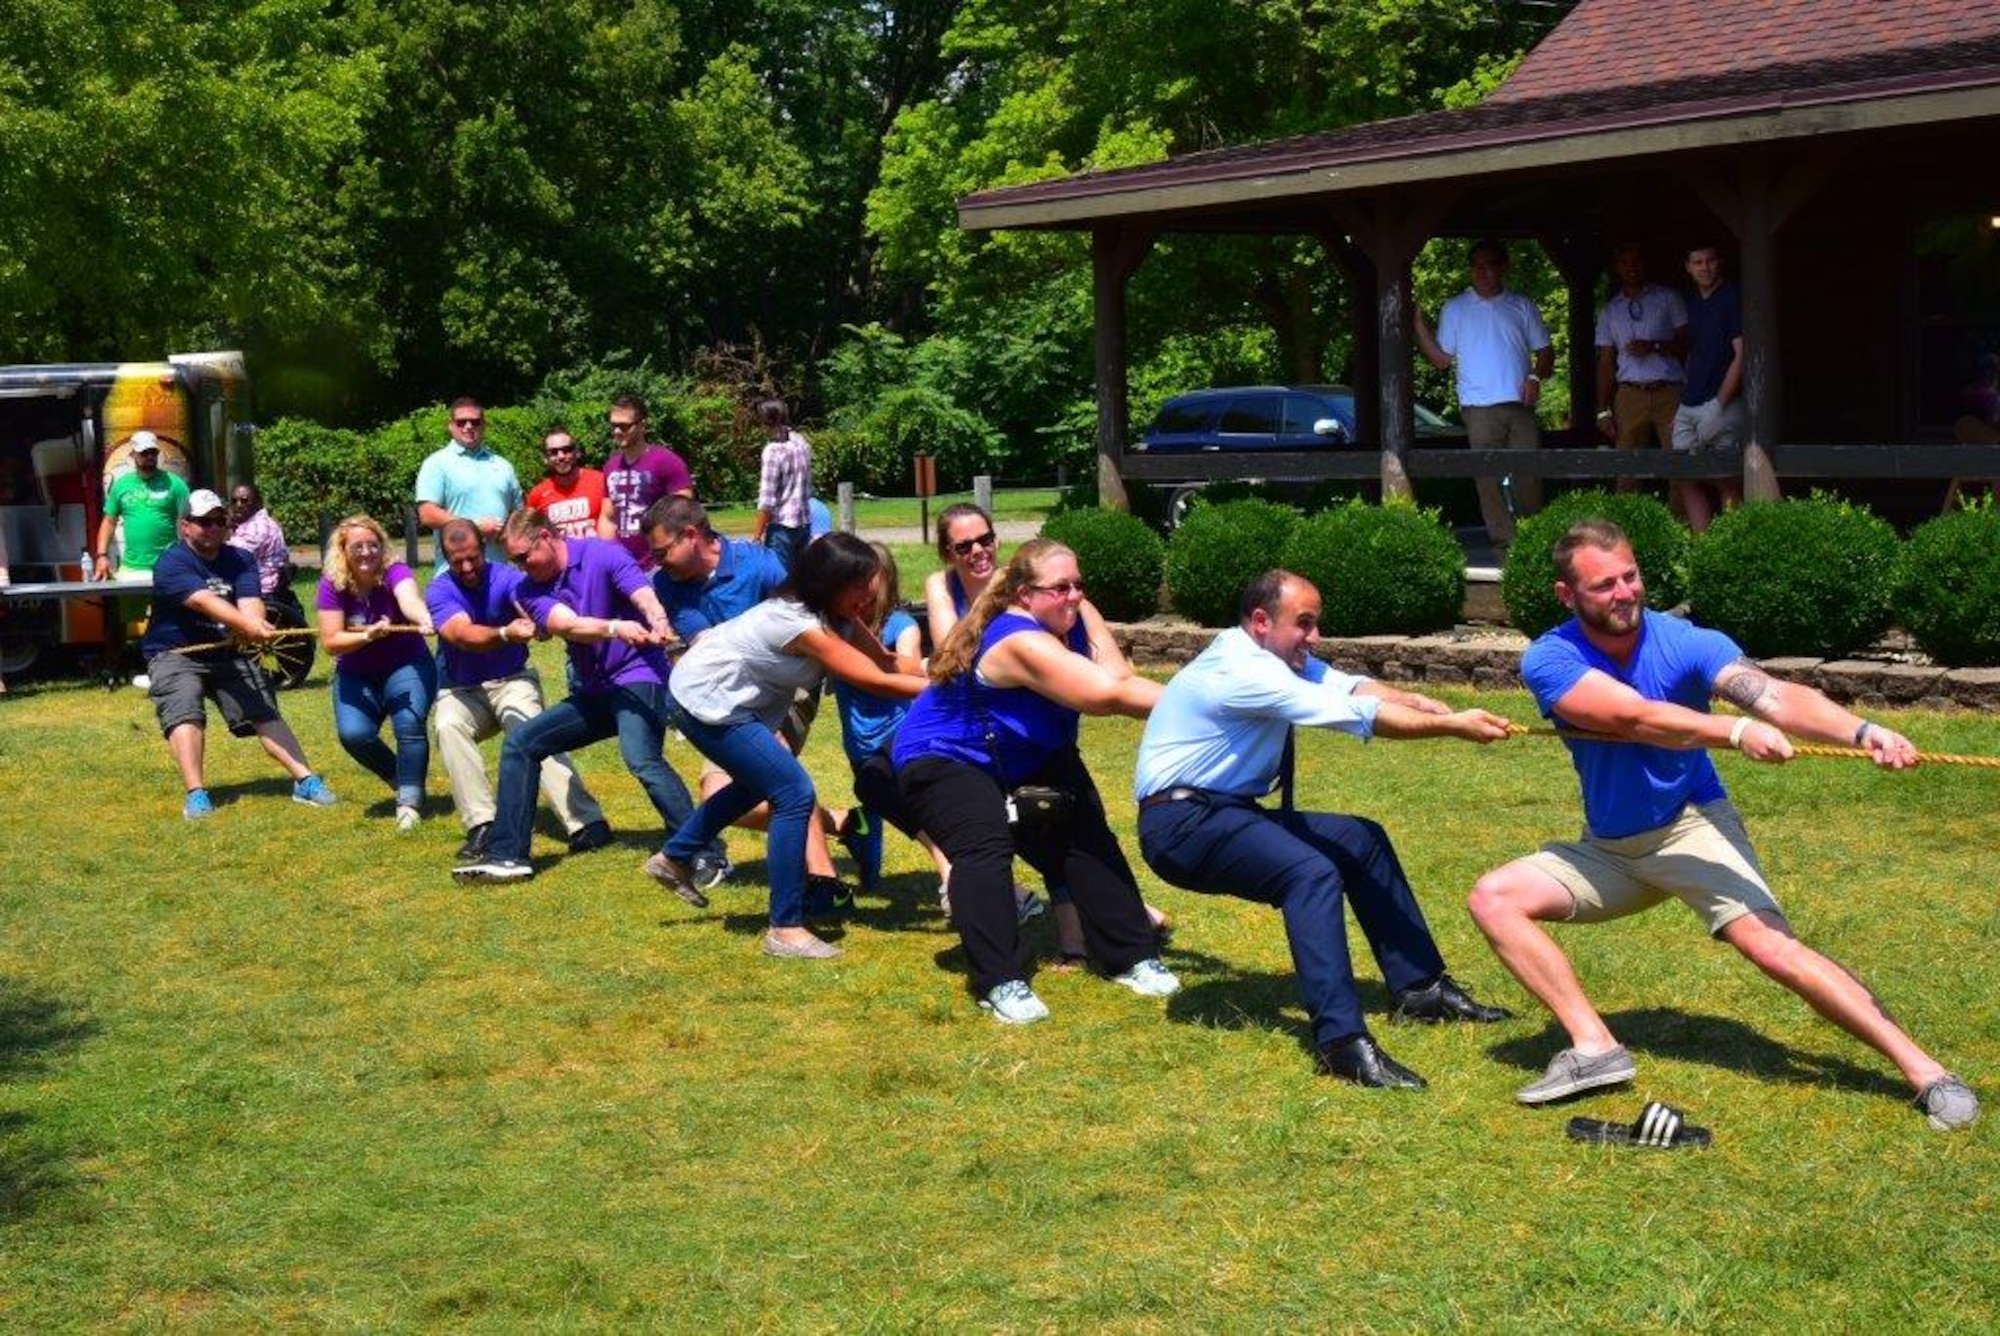 Financial management and contracting interns battle it out with program management interns in a friendly challenge of tug of war at the inaugural Wright-Patterson Air Force Base picnic held at Bass Lake Aug. 10.The PM interns were victorious. (U.S. Air Force photo/Alex Feuling)